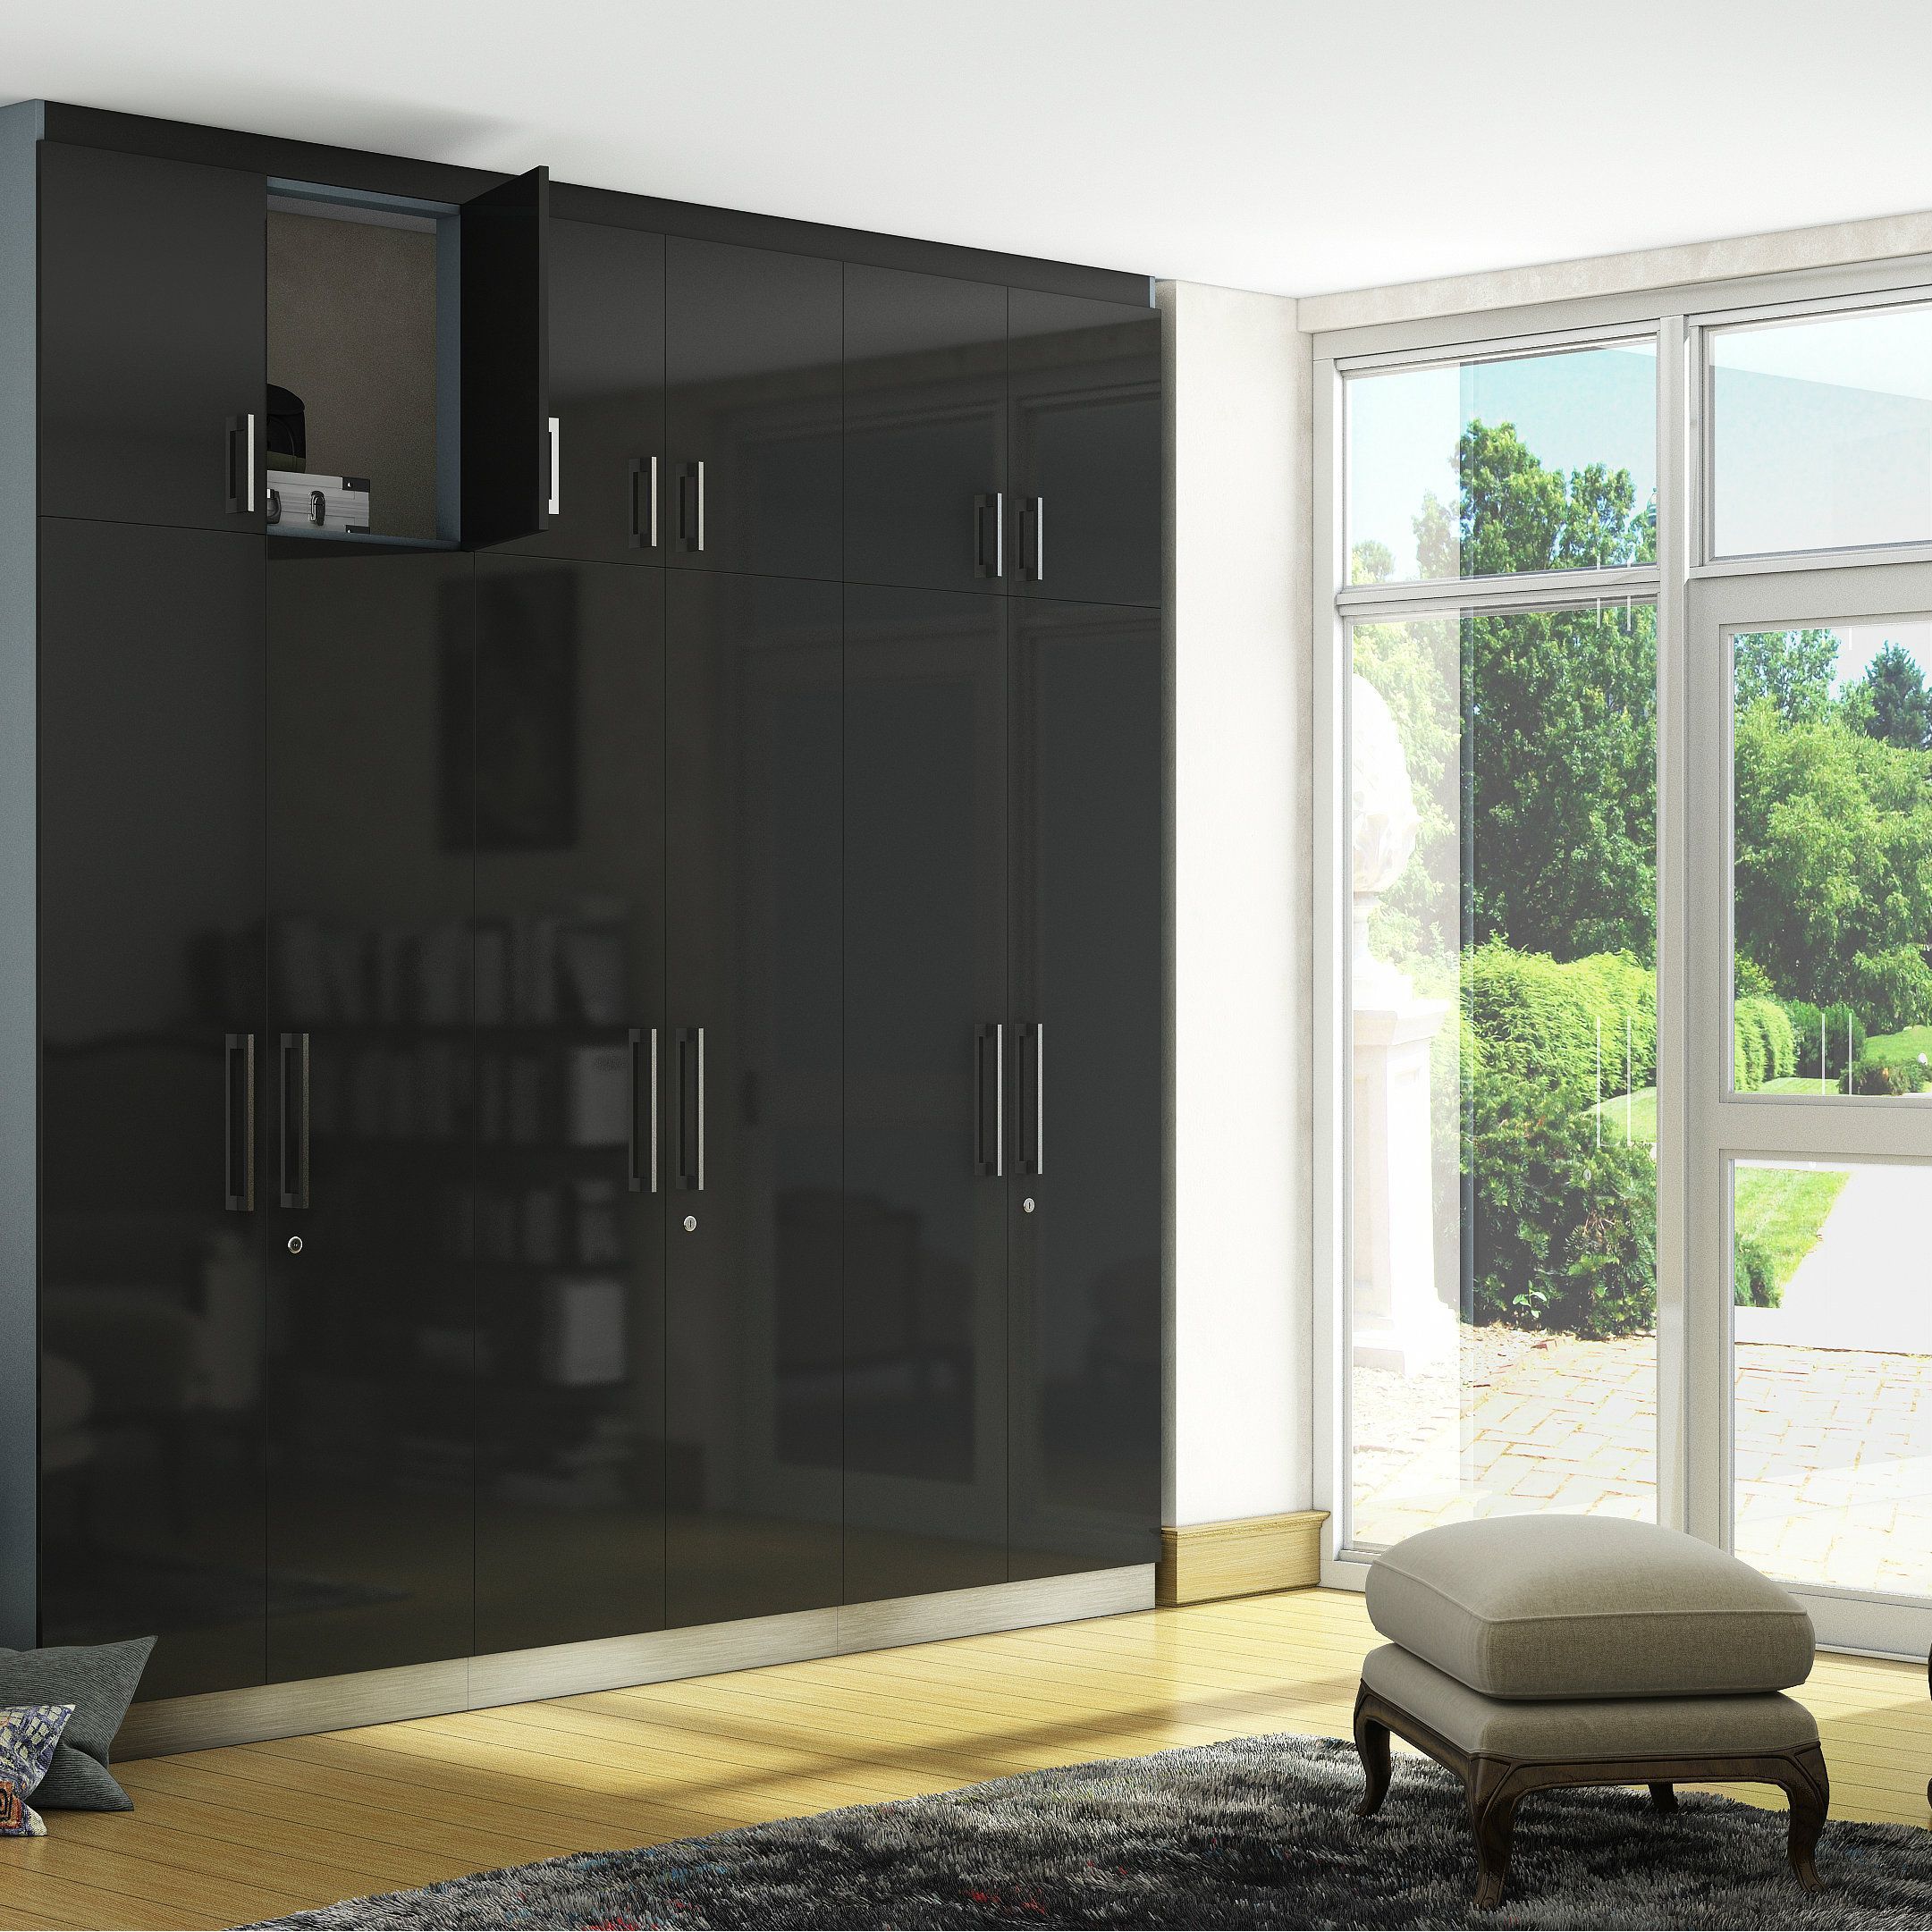 A Glossy Black Wardrobe That Is Every Bit As Impressive And Functional |  Wardrobe Design, Furniture Design, Grey Wardrobe Inside Gloss Black Wardrobes (Photo 3 of 15)